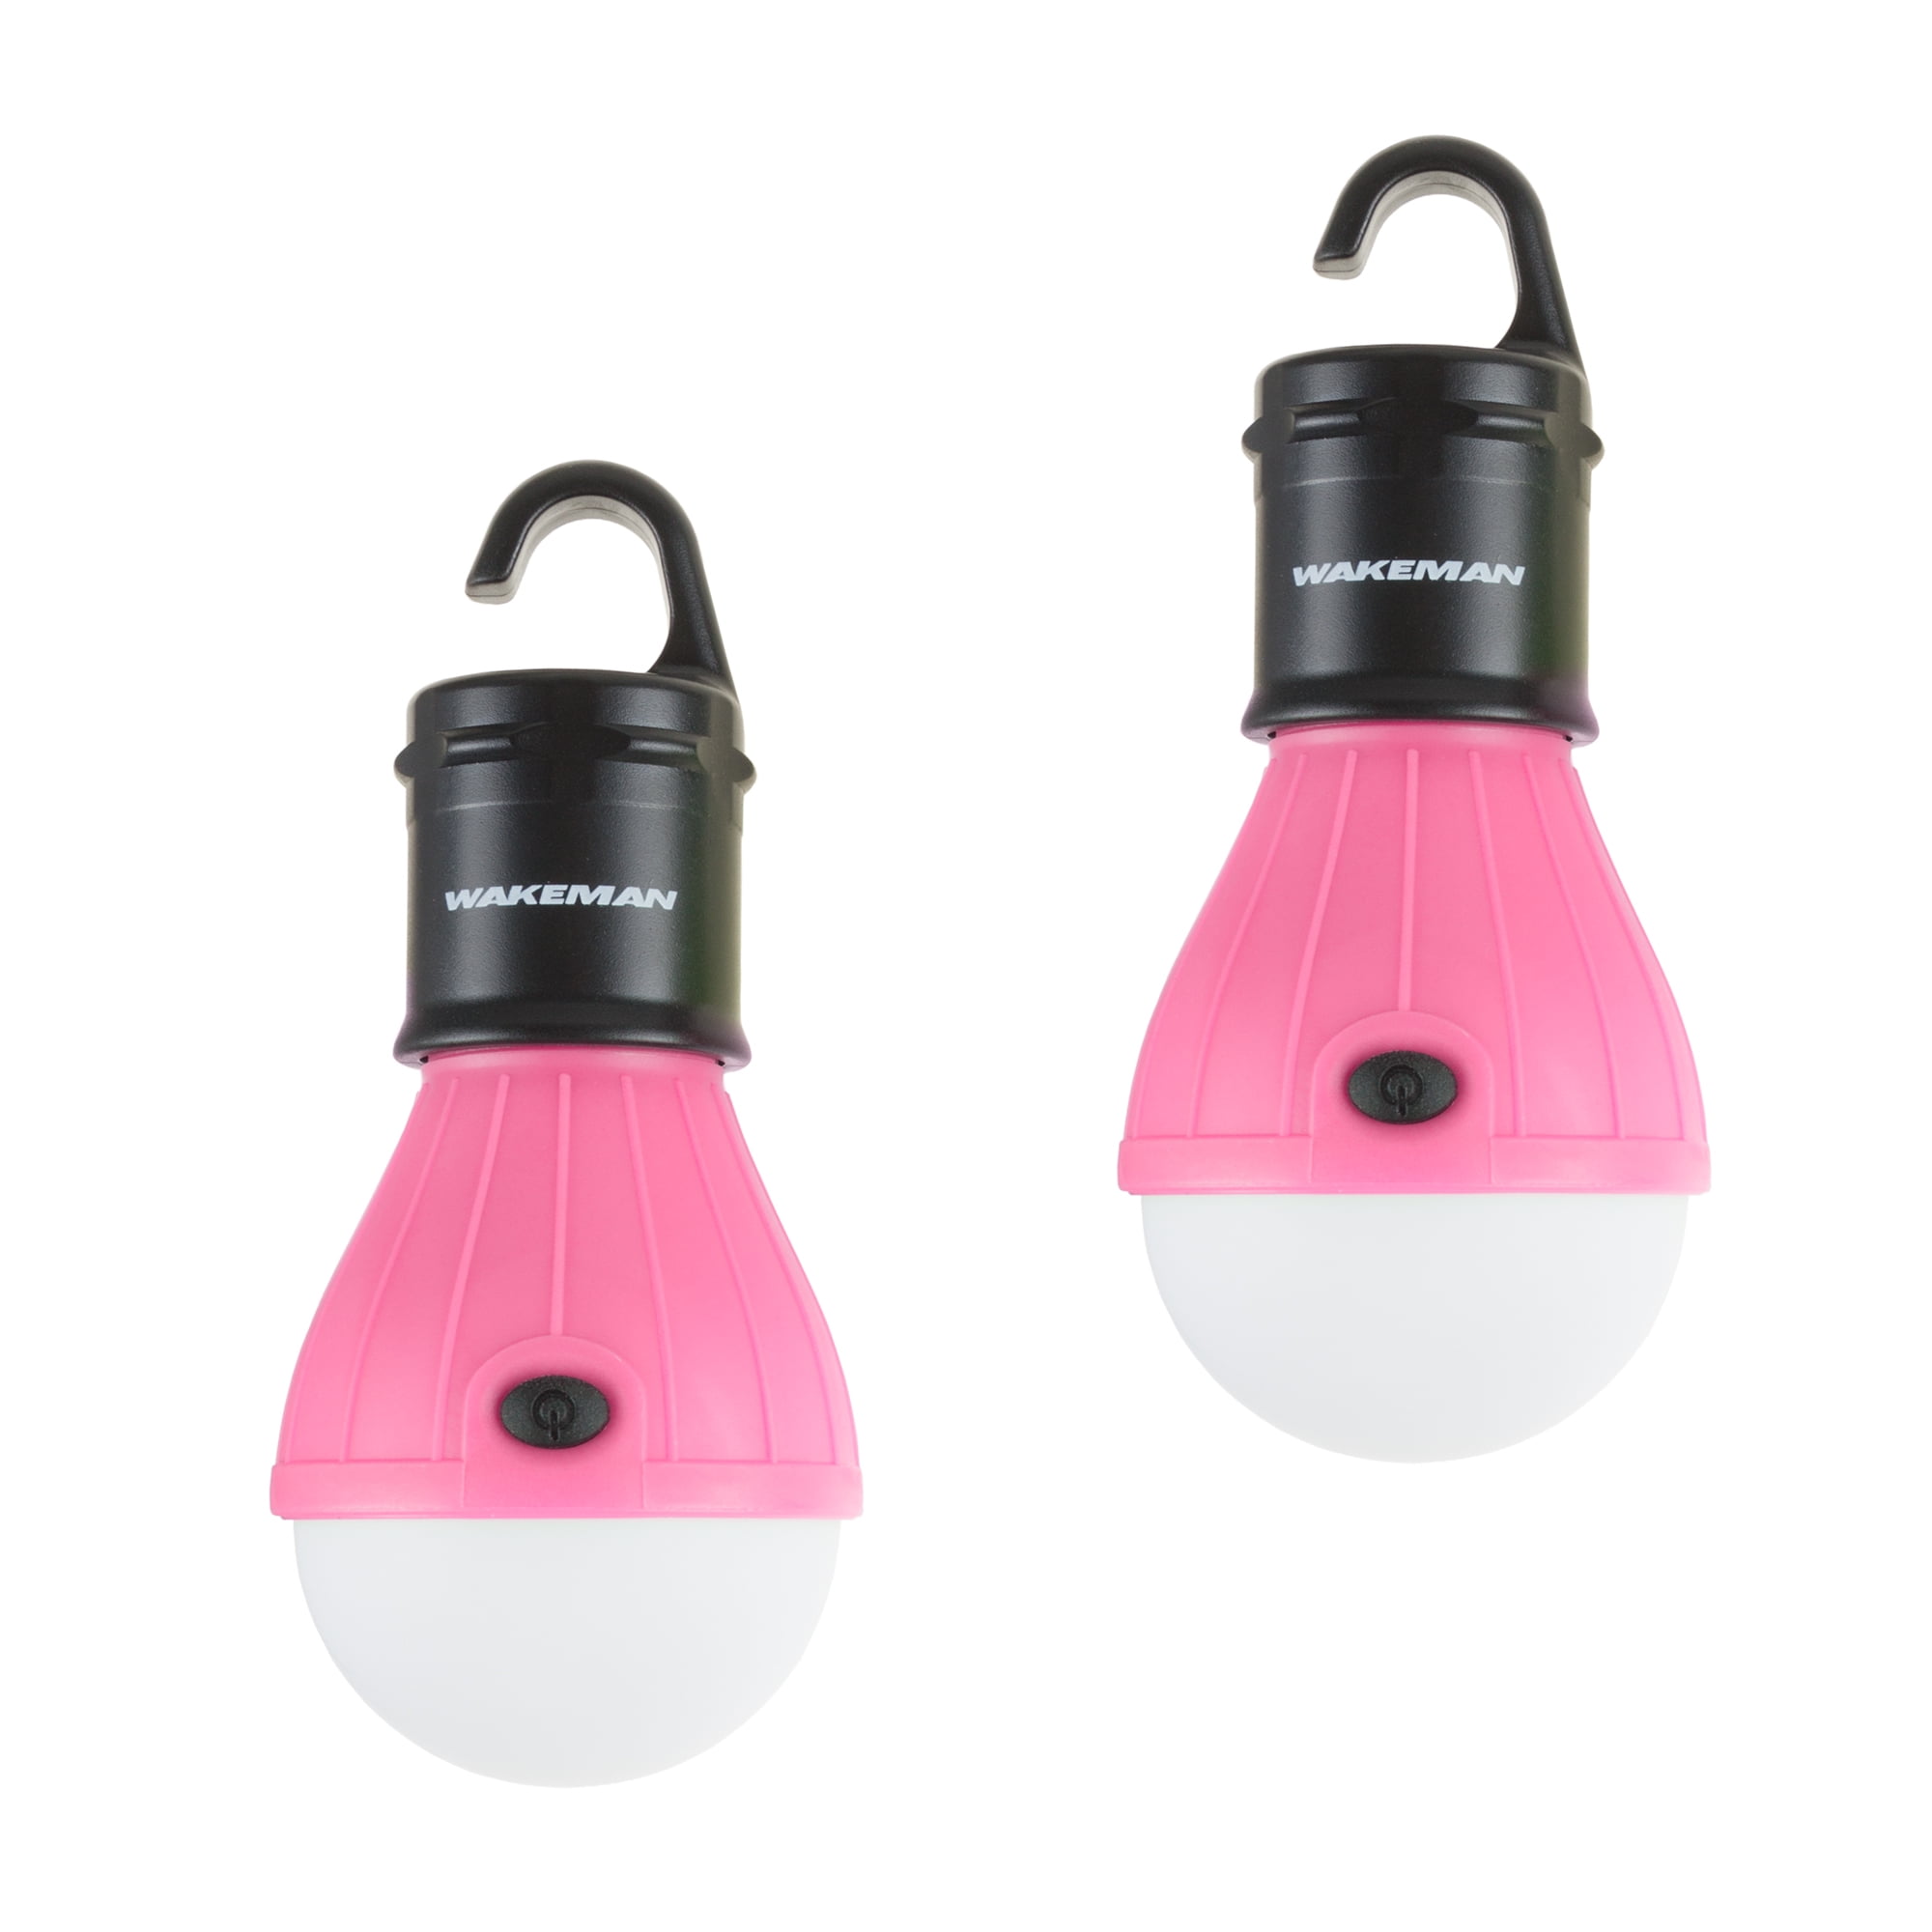 Wakeman 3 Portable Pack with Emergency) (Pink) LED and (For Hiking Settings 2 Lights By Hanging Tents Lumen Bulb- Tent Light Camping 60 Outdoors and